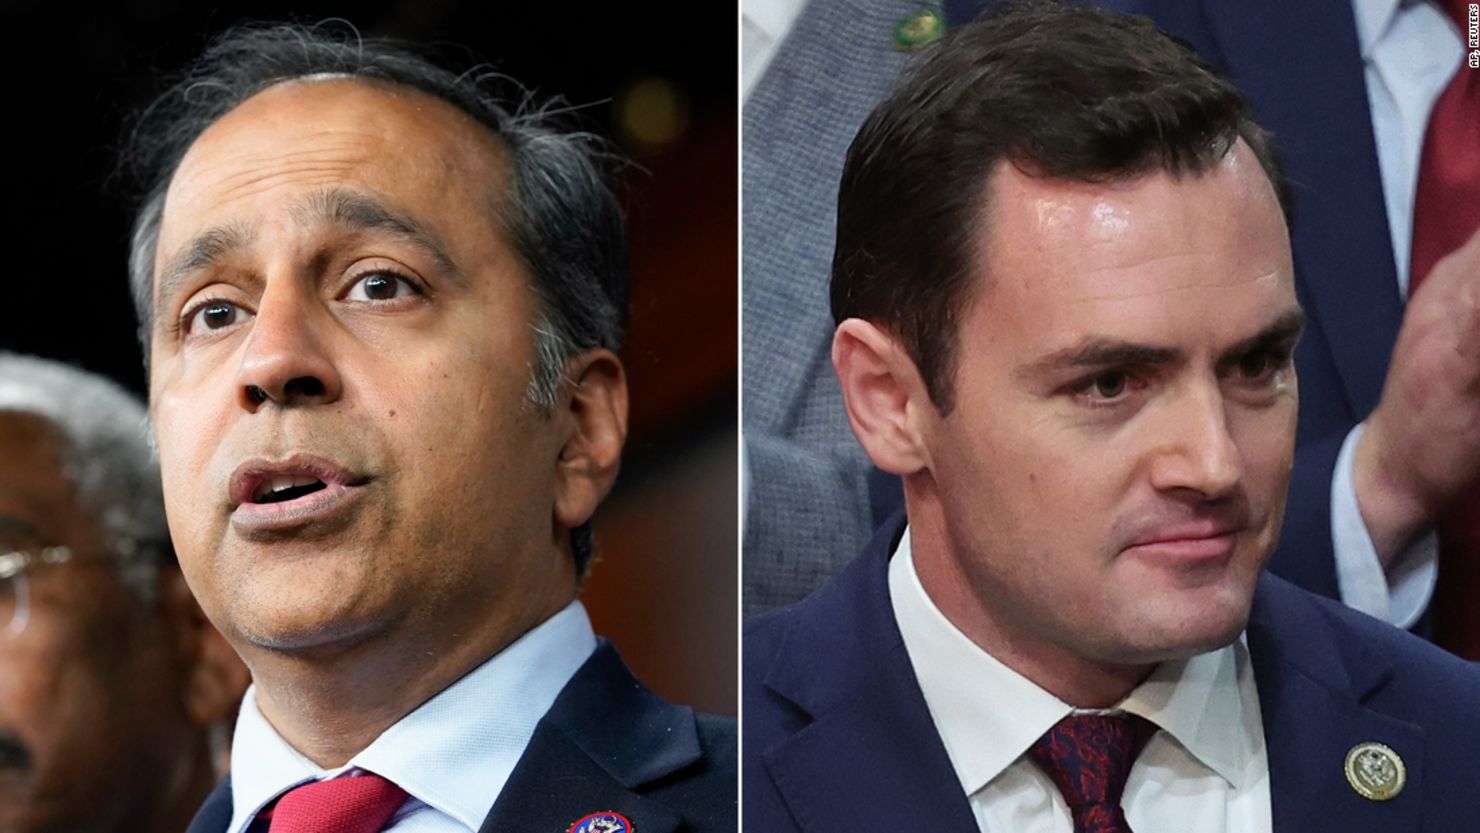 Illinois Rep. Raja Krishnamoorthi, left, and Wisconsin Rep. Mike Gallagher, at right. Gallagher is the chair of a new select committee and Krishnamoorthi is the panel's top Democrat.